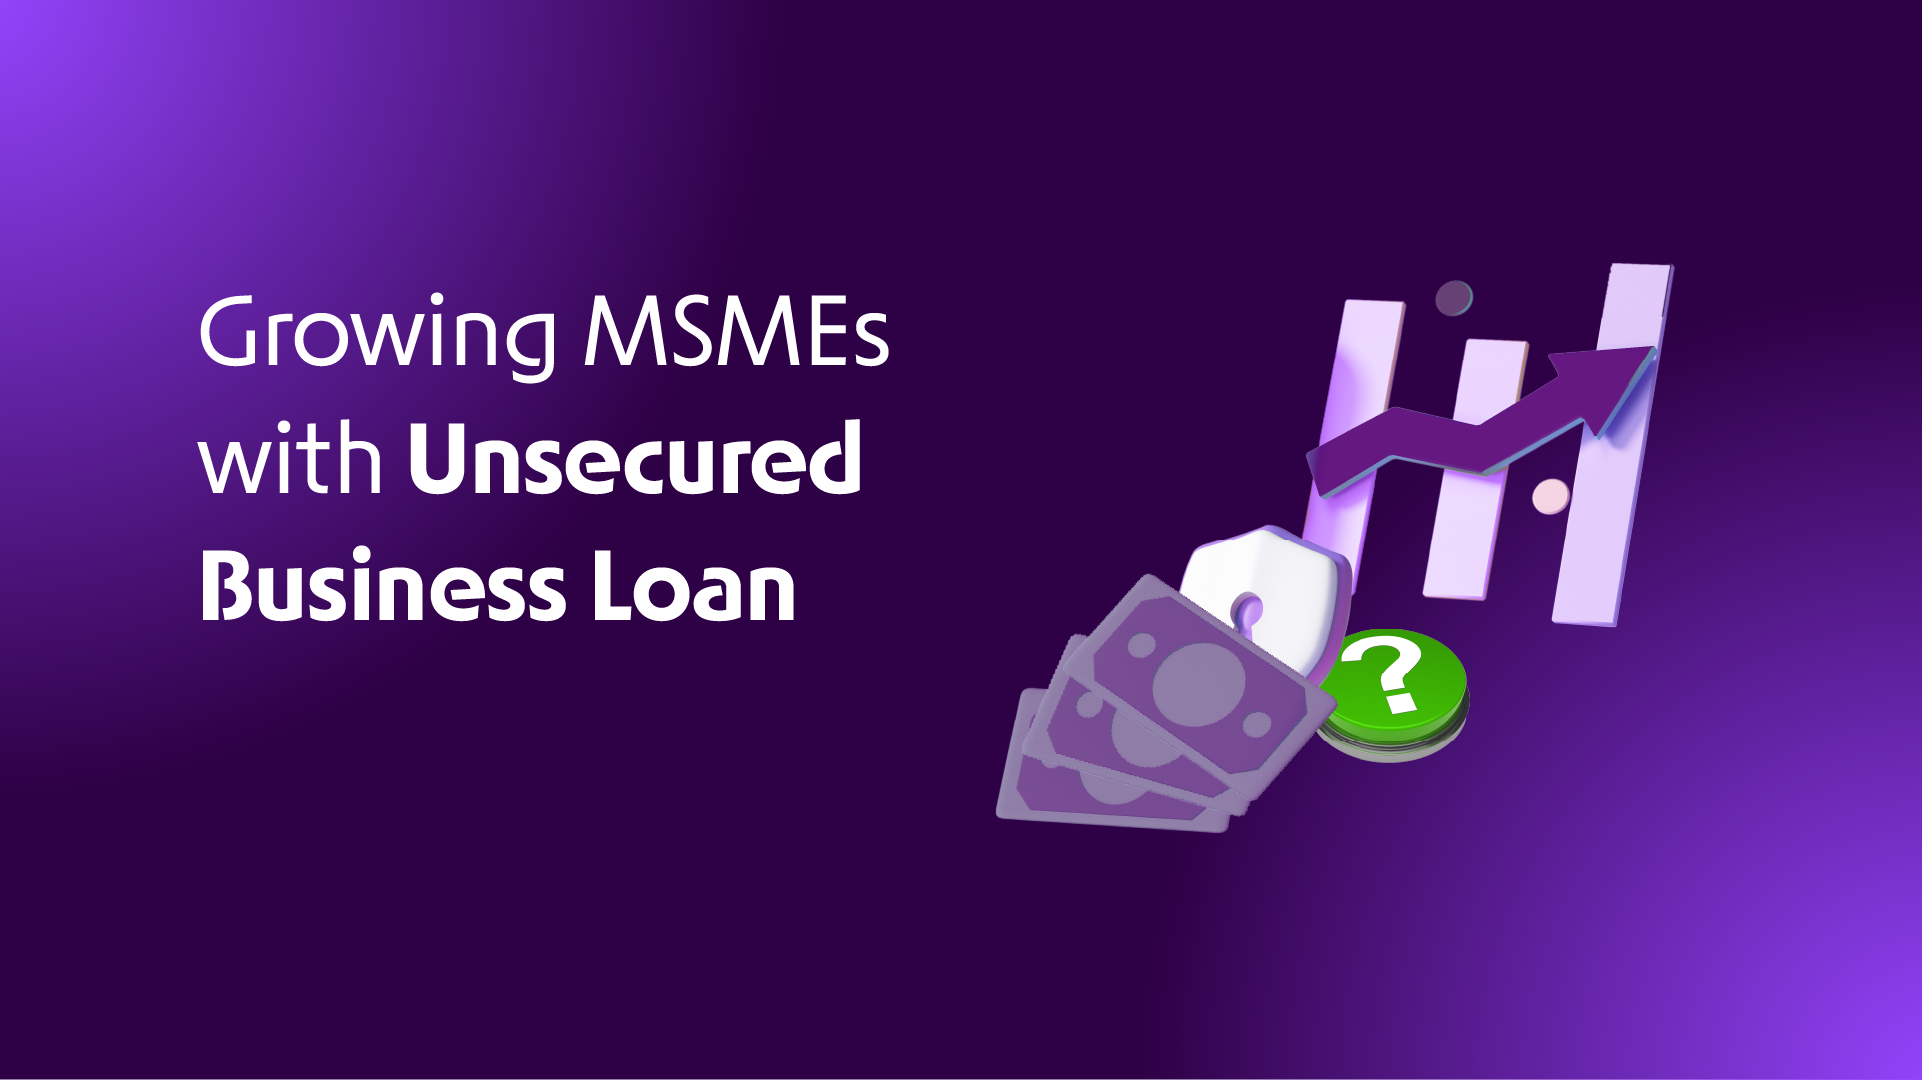 Unsecured Business Loan